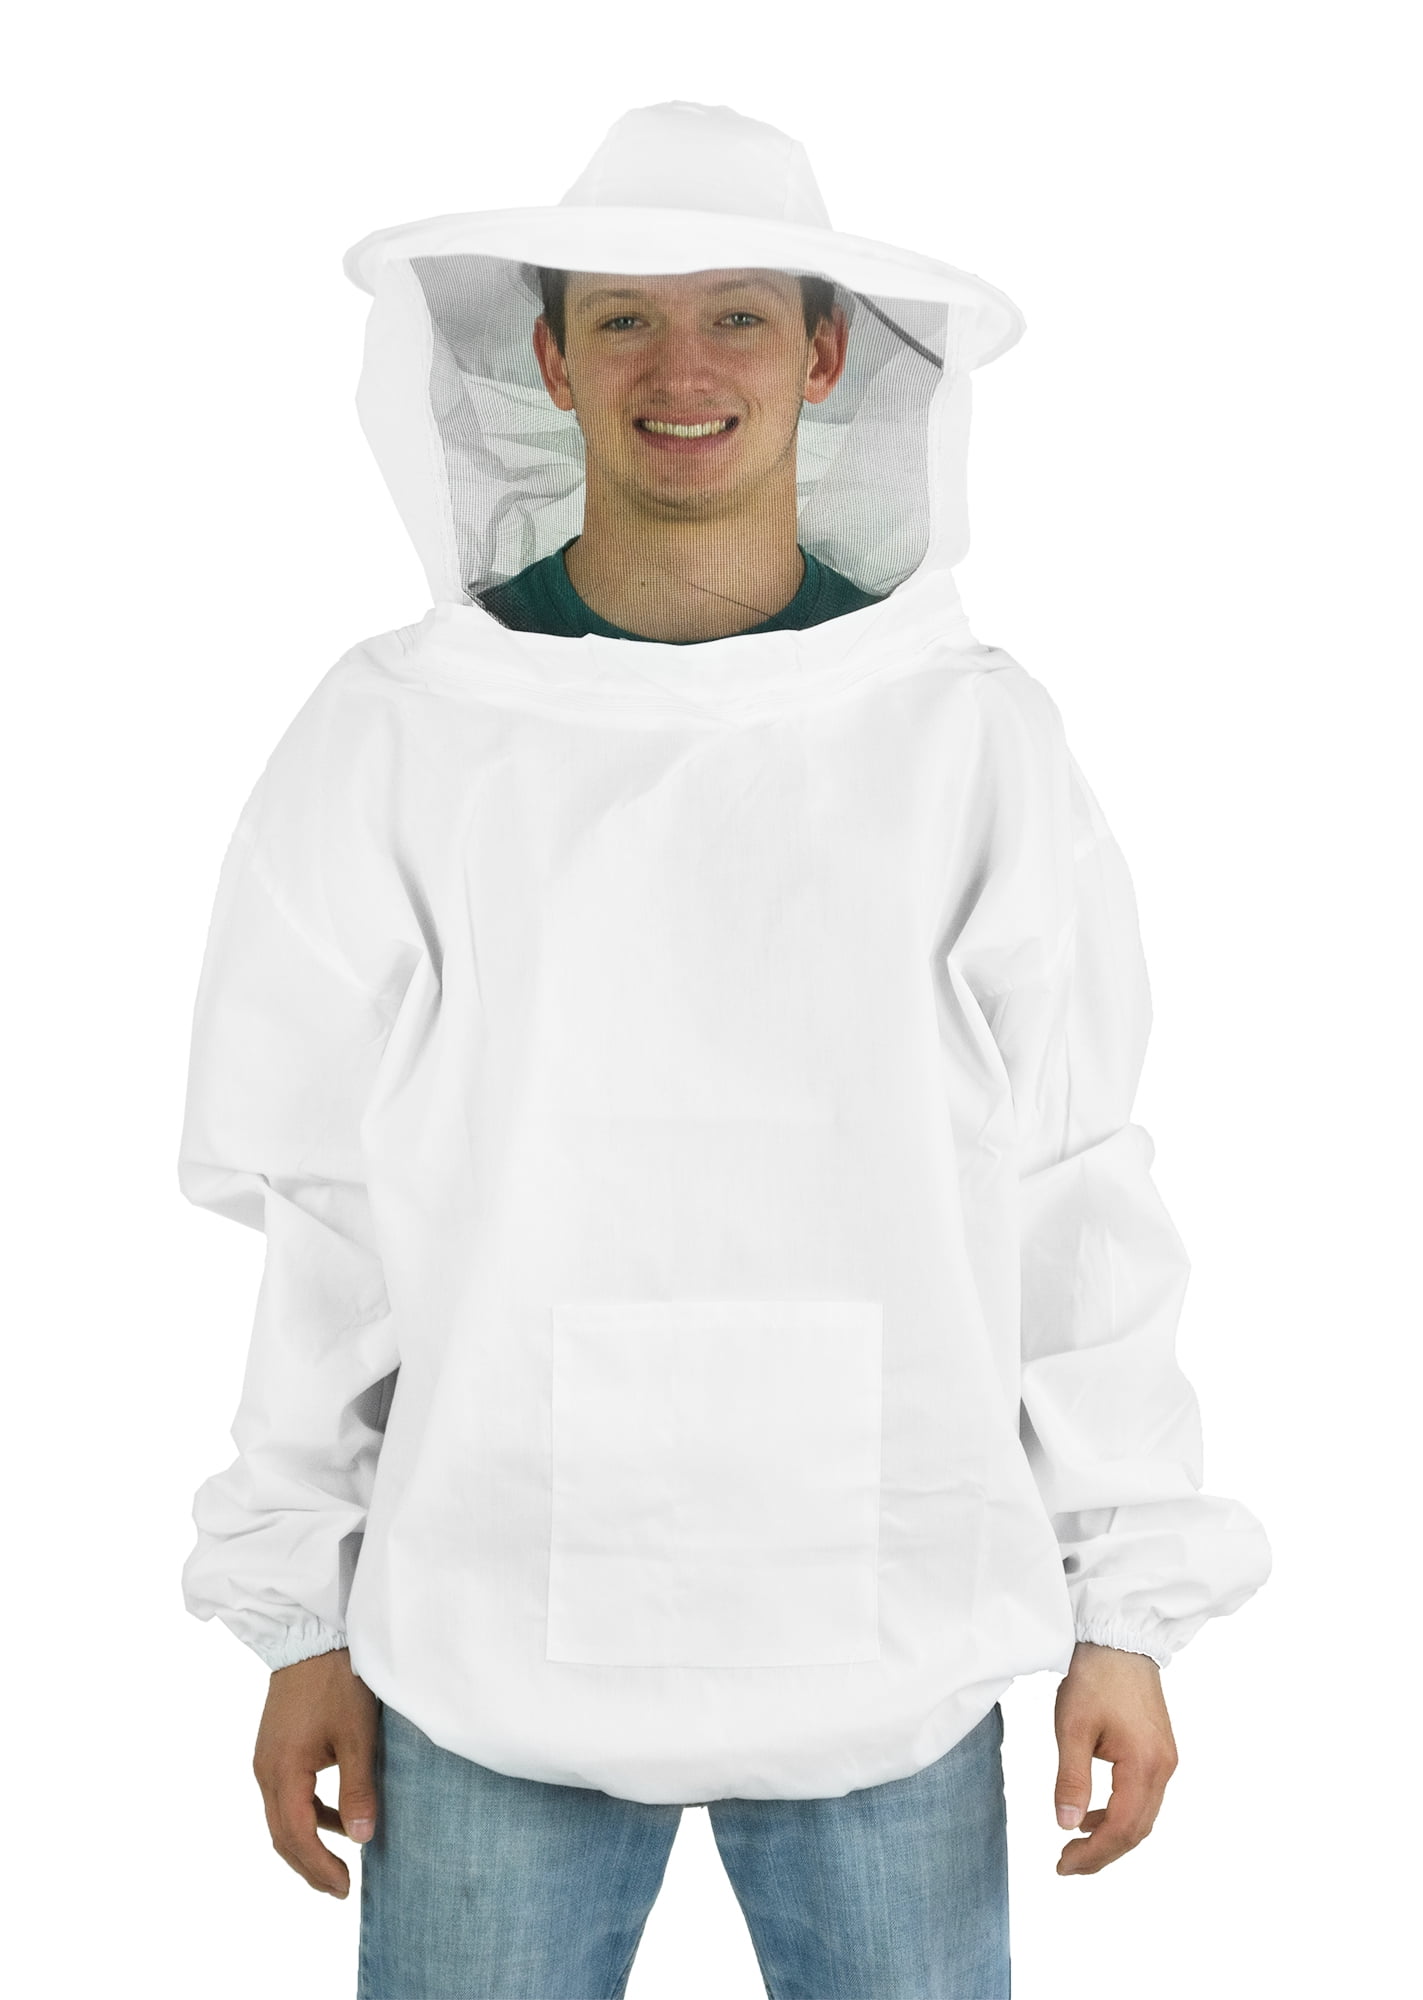 6 FT XL Beekeeping Protective Jacket Veil Dress Suit Pull Hat Smock Equipment US 